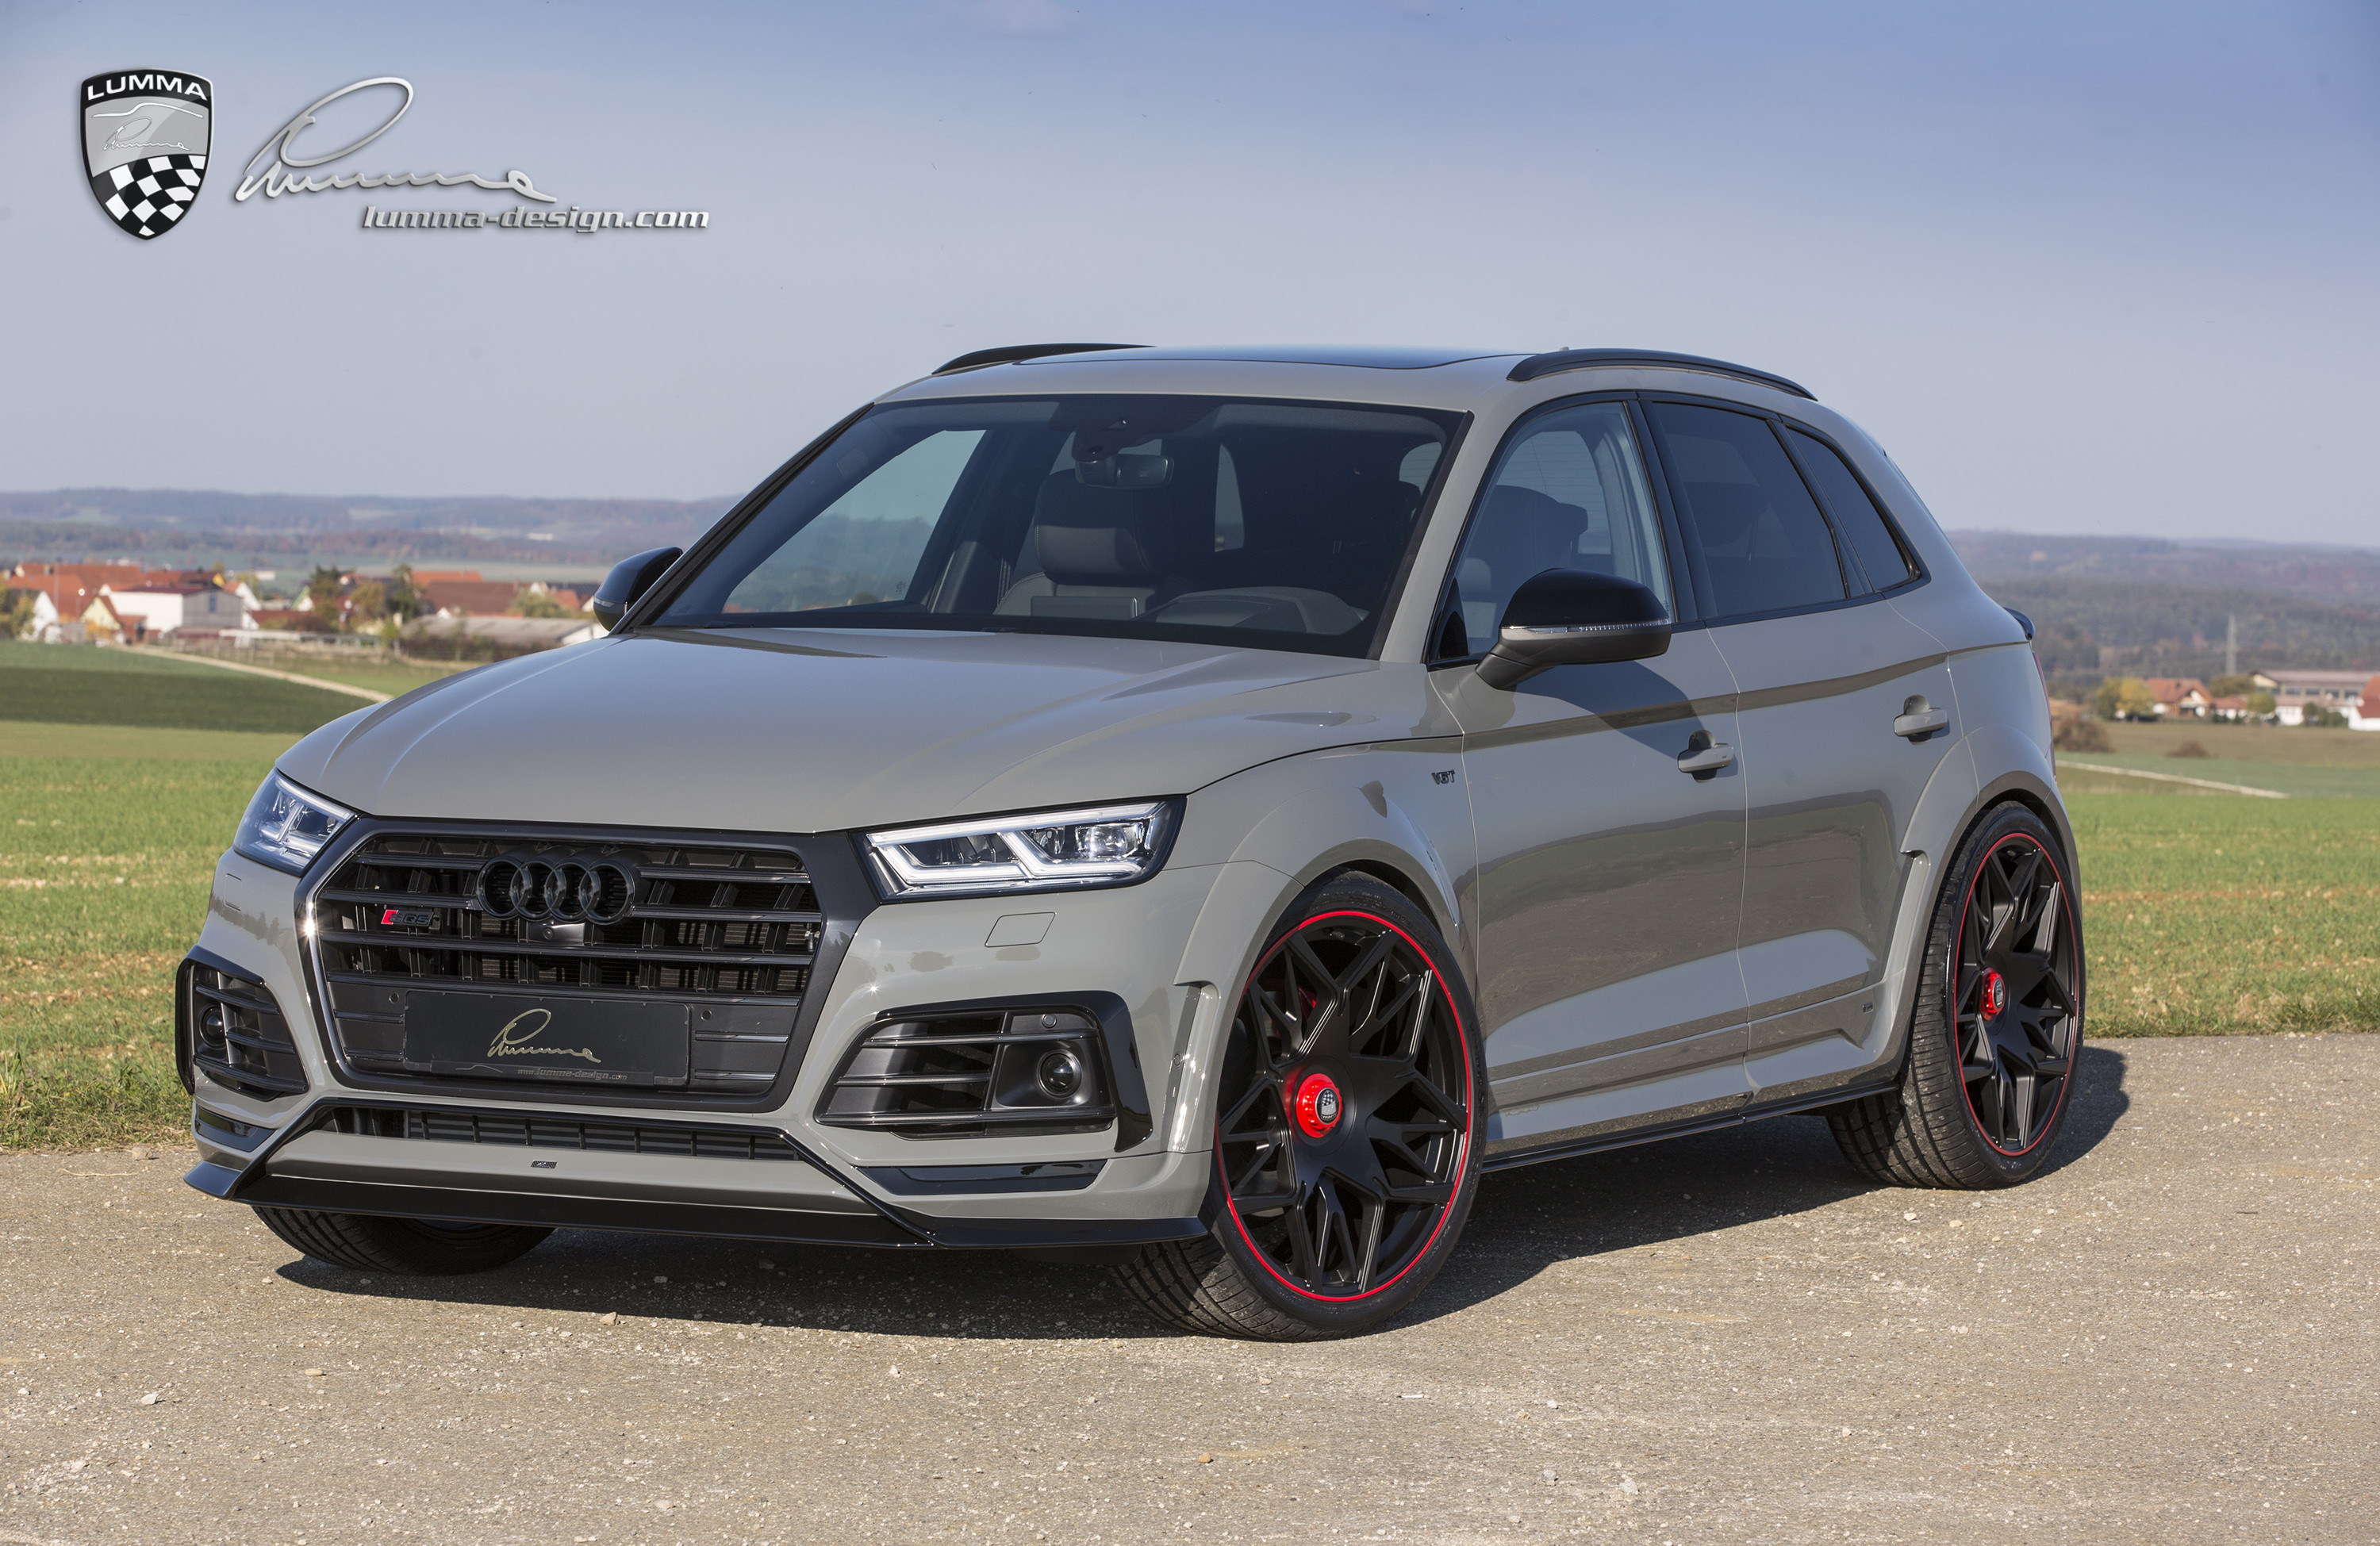 Lumma Clr 5s Body Kit For Audi Sq5 Is As Wide As Q7 Autoevolution